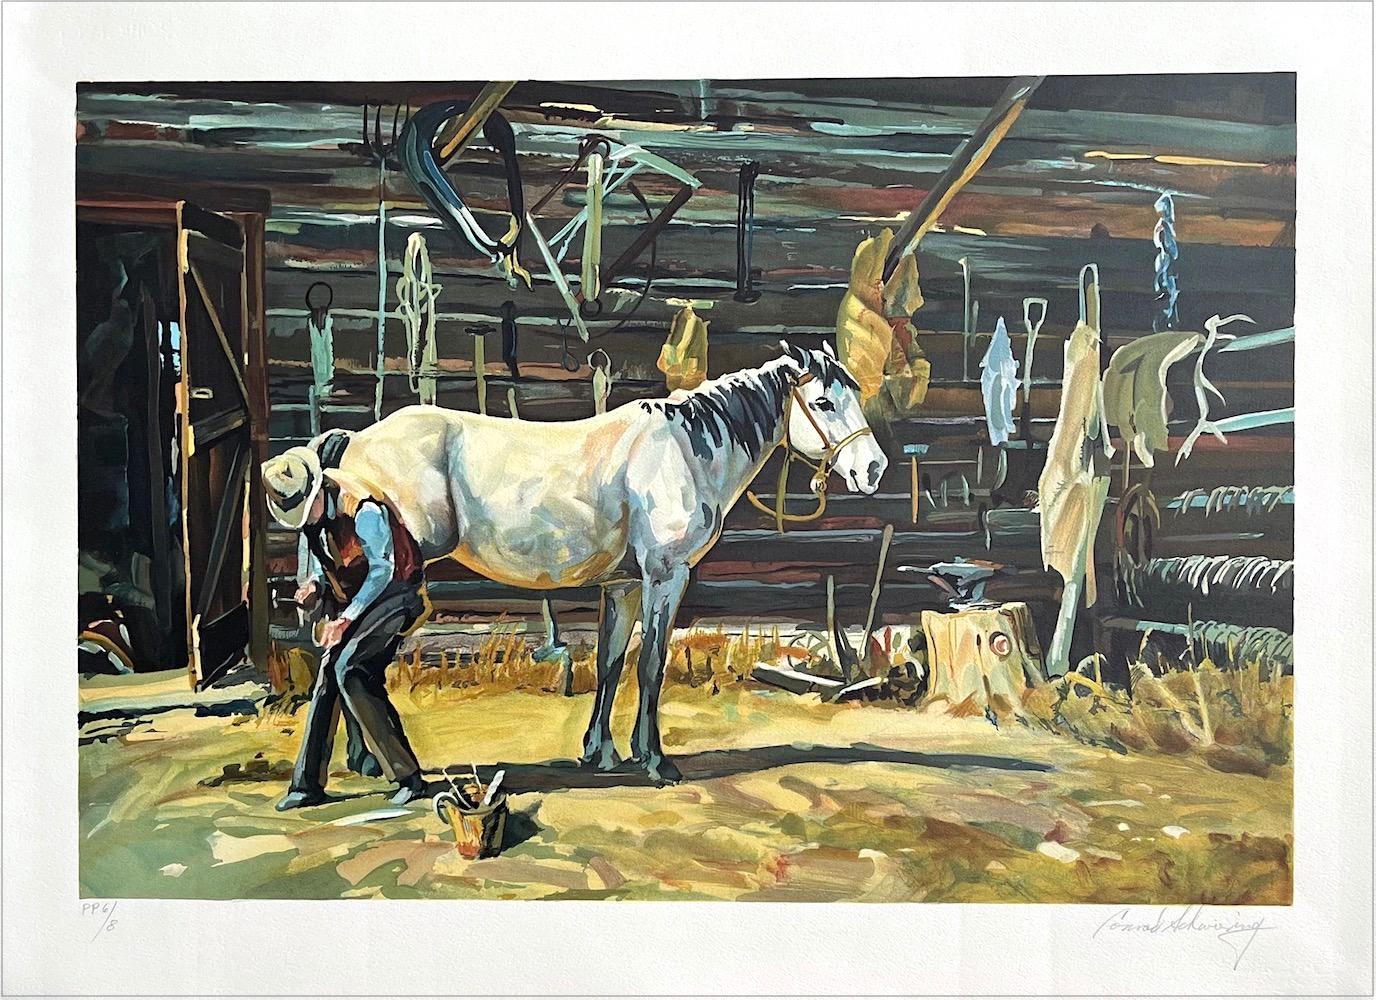 SHOE SHOP Signed Lithograph, Cowboy Farrier, Horseshoe, White Horse, Western Art - Print by Conrad Schwiering